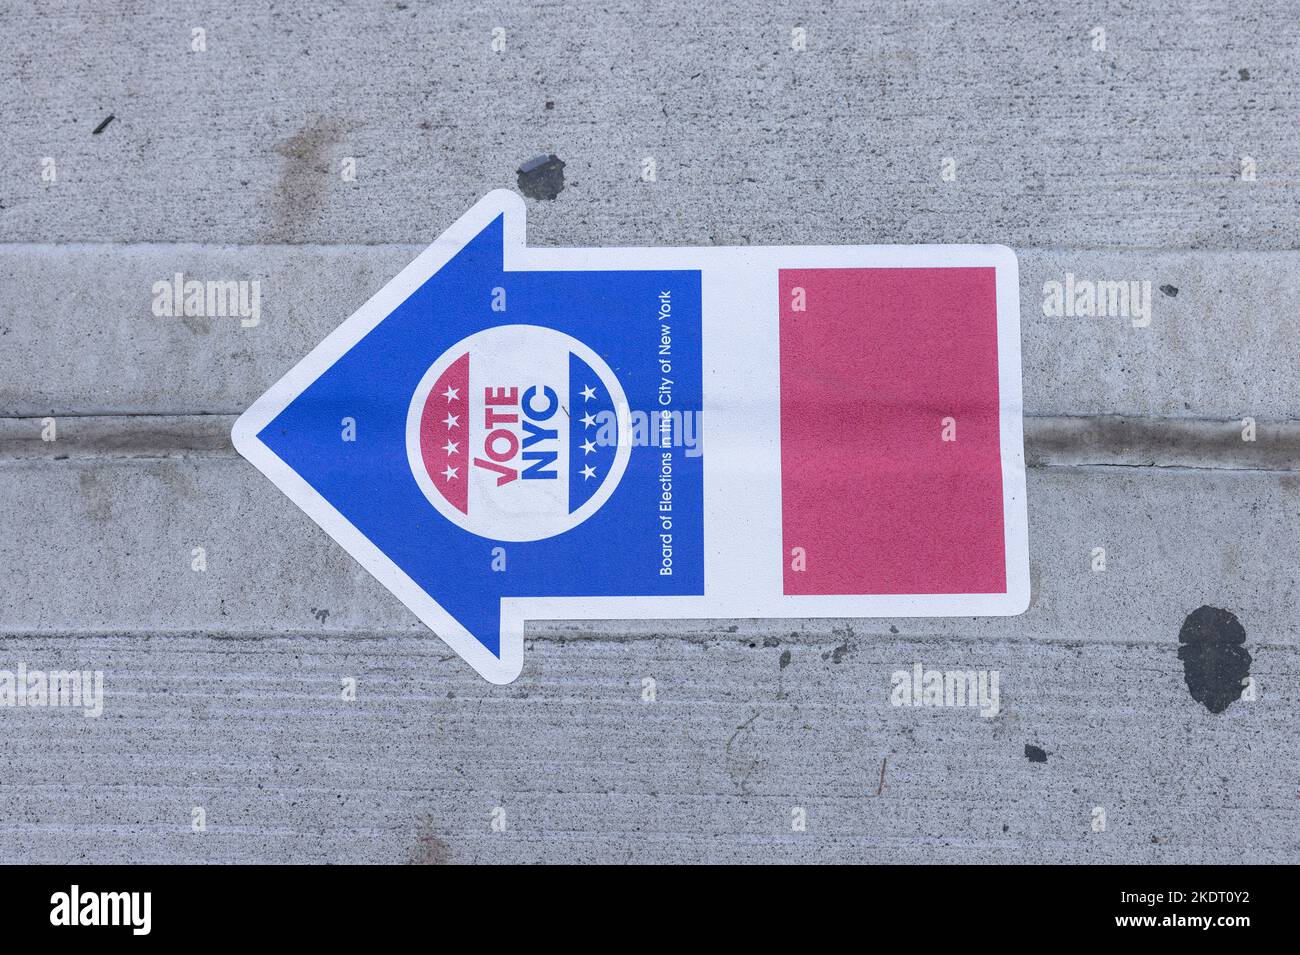 NEW YORK, N.Y. — November 8, 2022: A ‘Vote NYC’ sticker is seen near a polling site in Manhattan’s TriBeCa neighborhood on Election Day 2022. Stock Photo